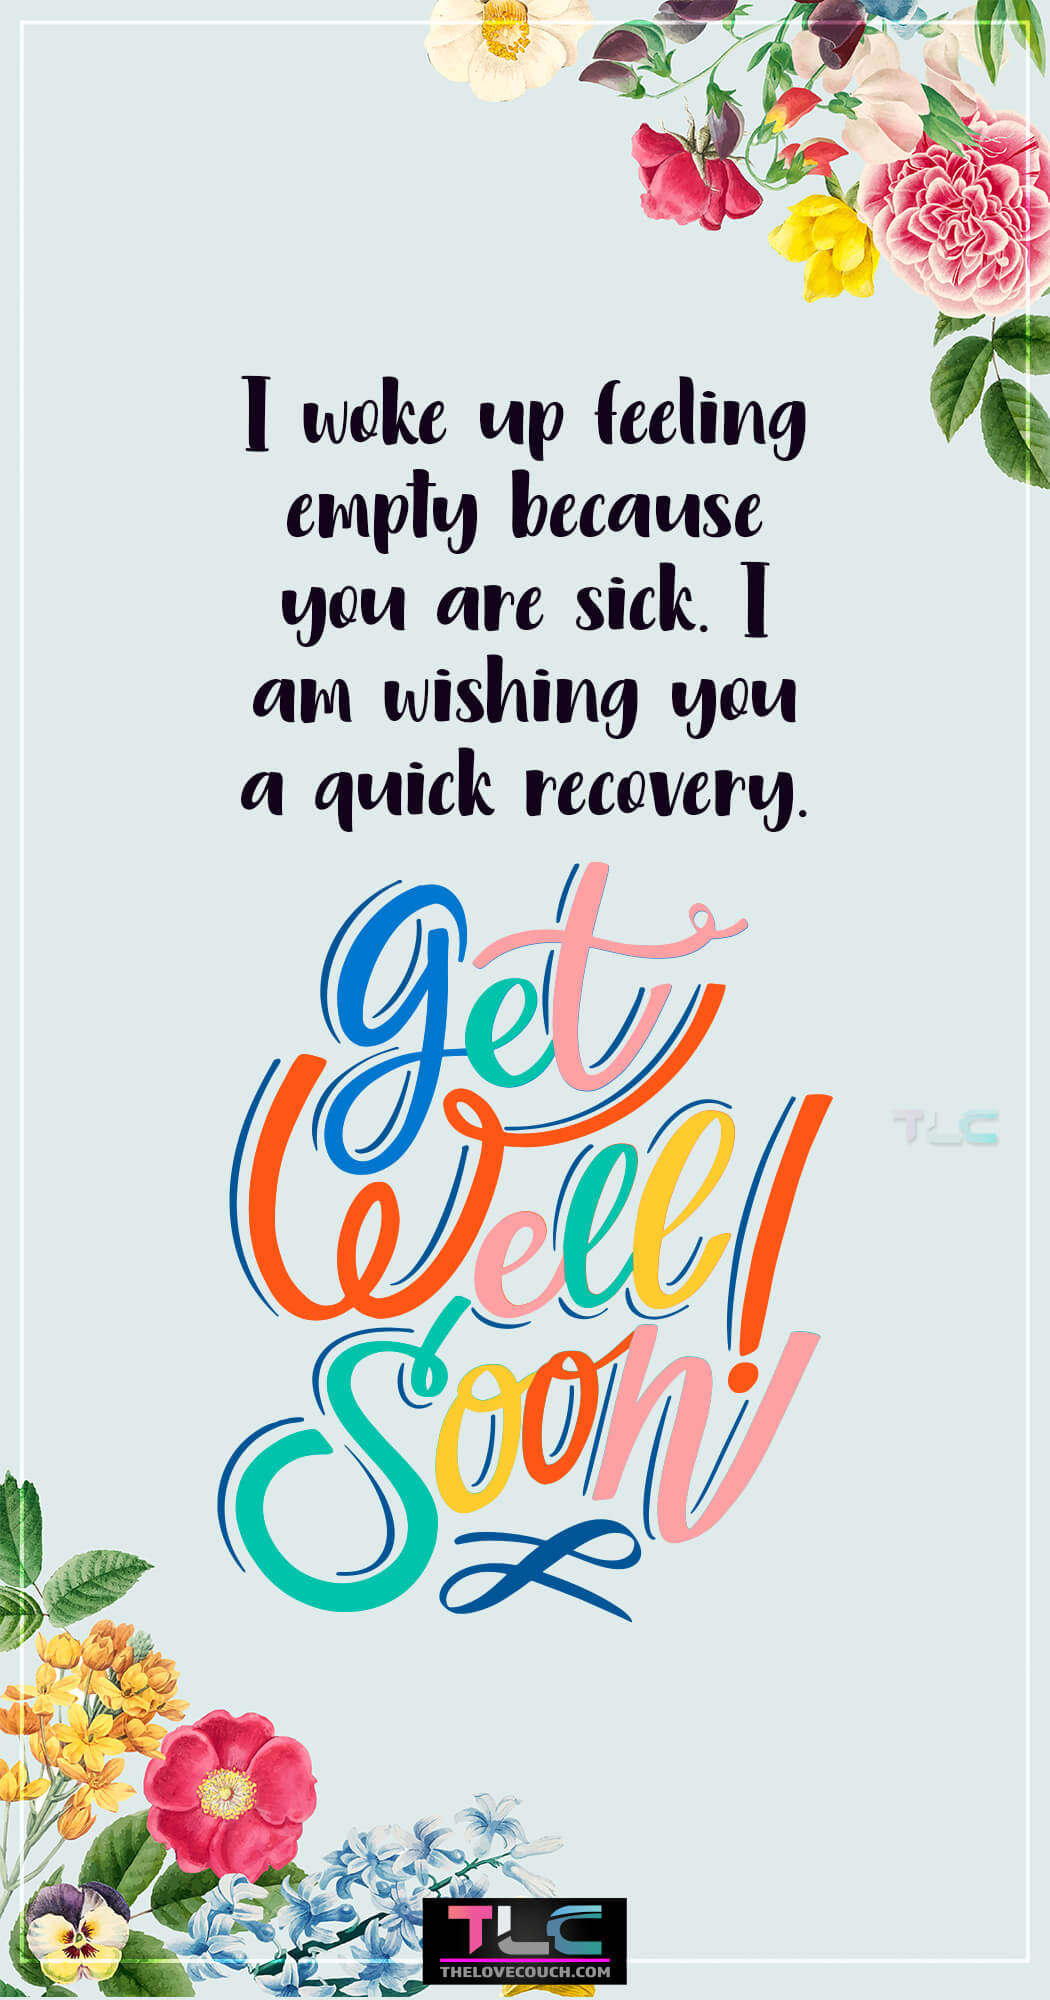 Get Well Messages For Loved Ones - I woke up feeling empty because you are sick. I am wishing you a quick recovery. Get well soon.